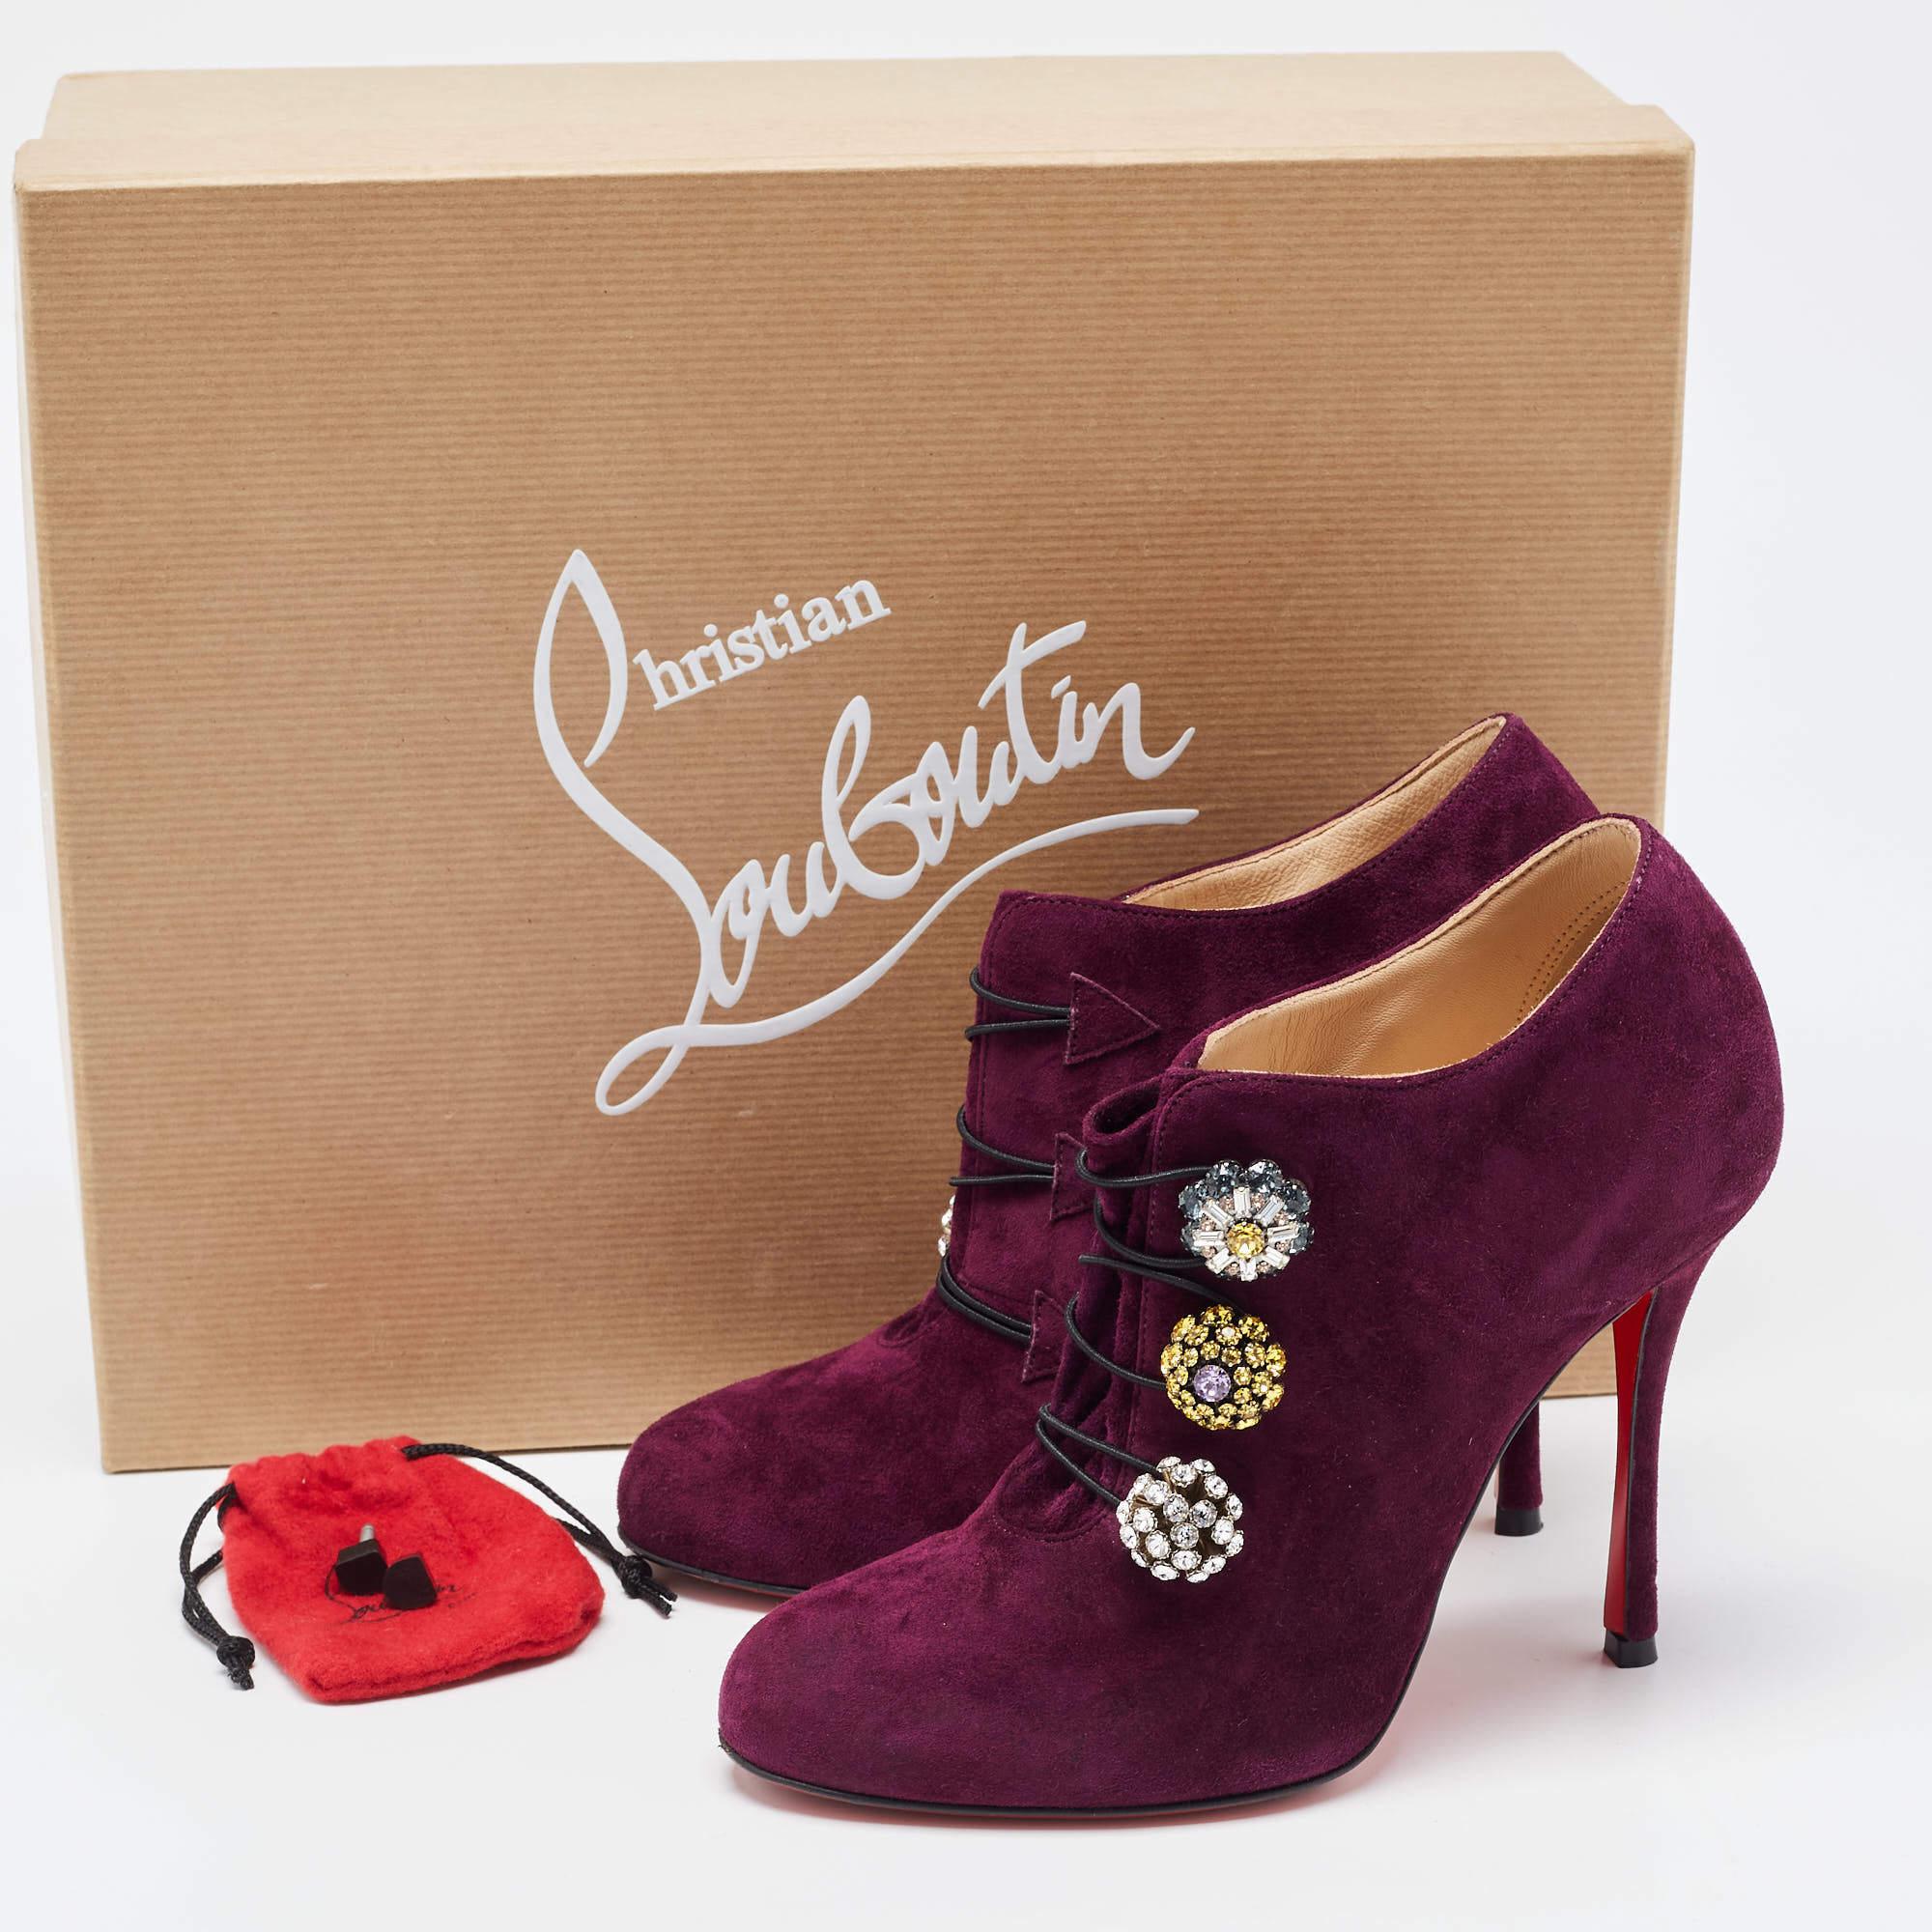 Christian Louboutin Purple Suede Booties Size 35.5 For Sale 4